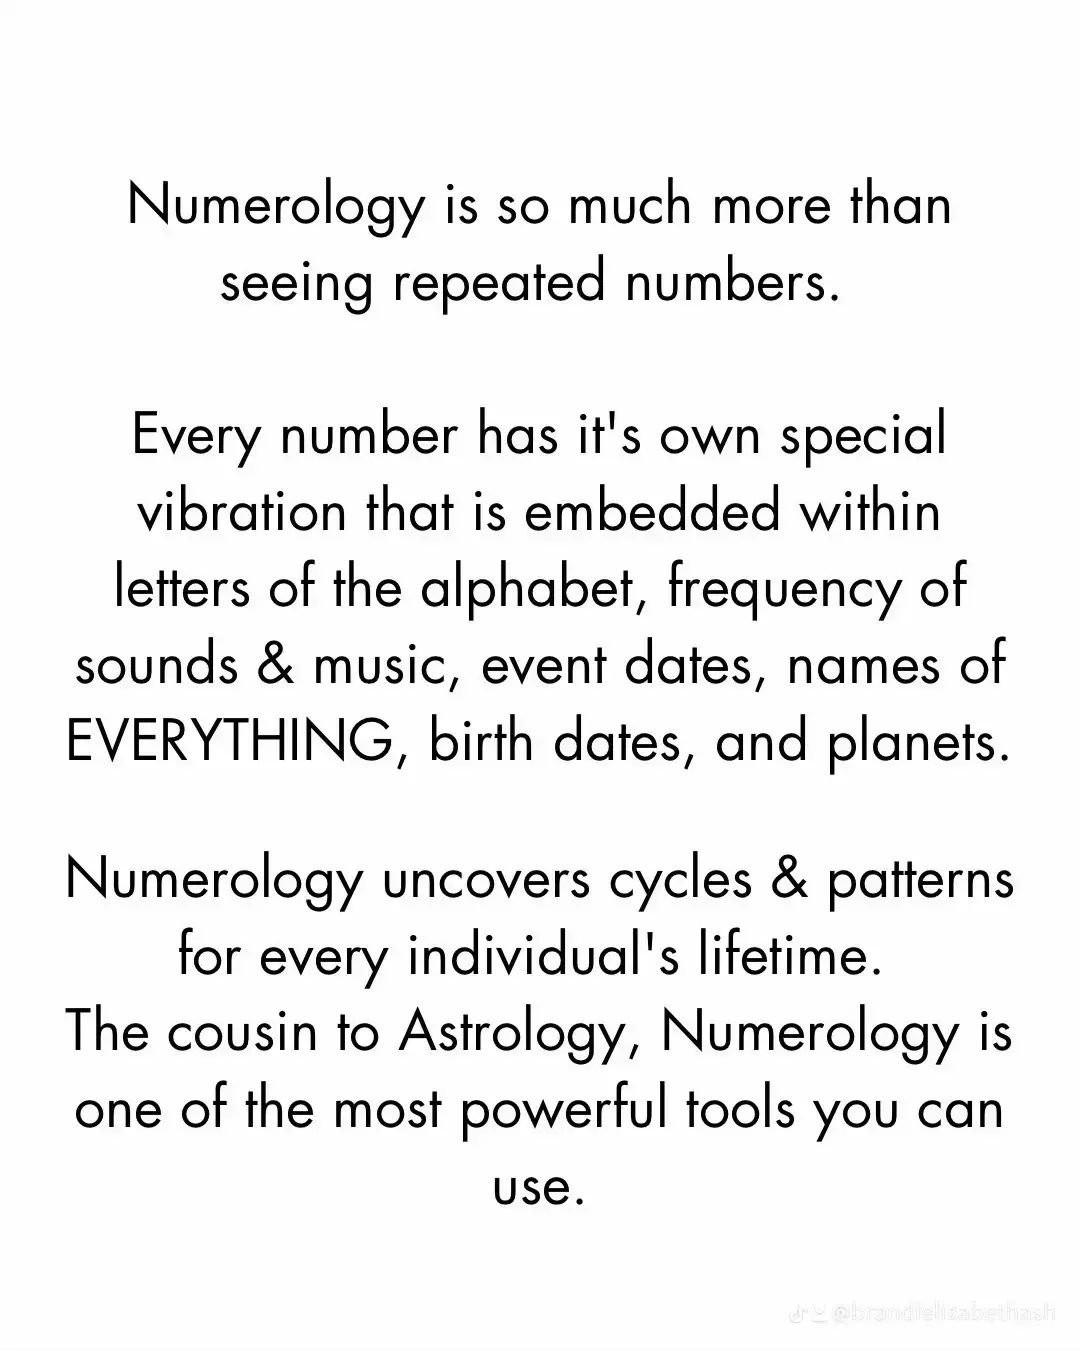  Numerology is so much more than seeing repeated numbers. Every number has it's own special vibration that is embedded within letters of the alphabet, frequency of sounds & music, event dates, names of EVERYTHING, birth dates, and planets.Numerology uncovers cycles & patterns for every individual's lifetime. The cousin to Astrology, Numerology is one of the most powerful tools you can use.